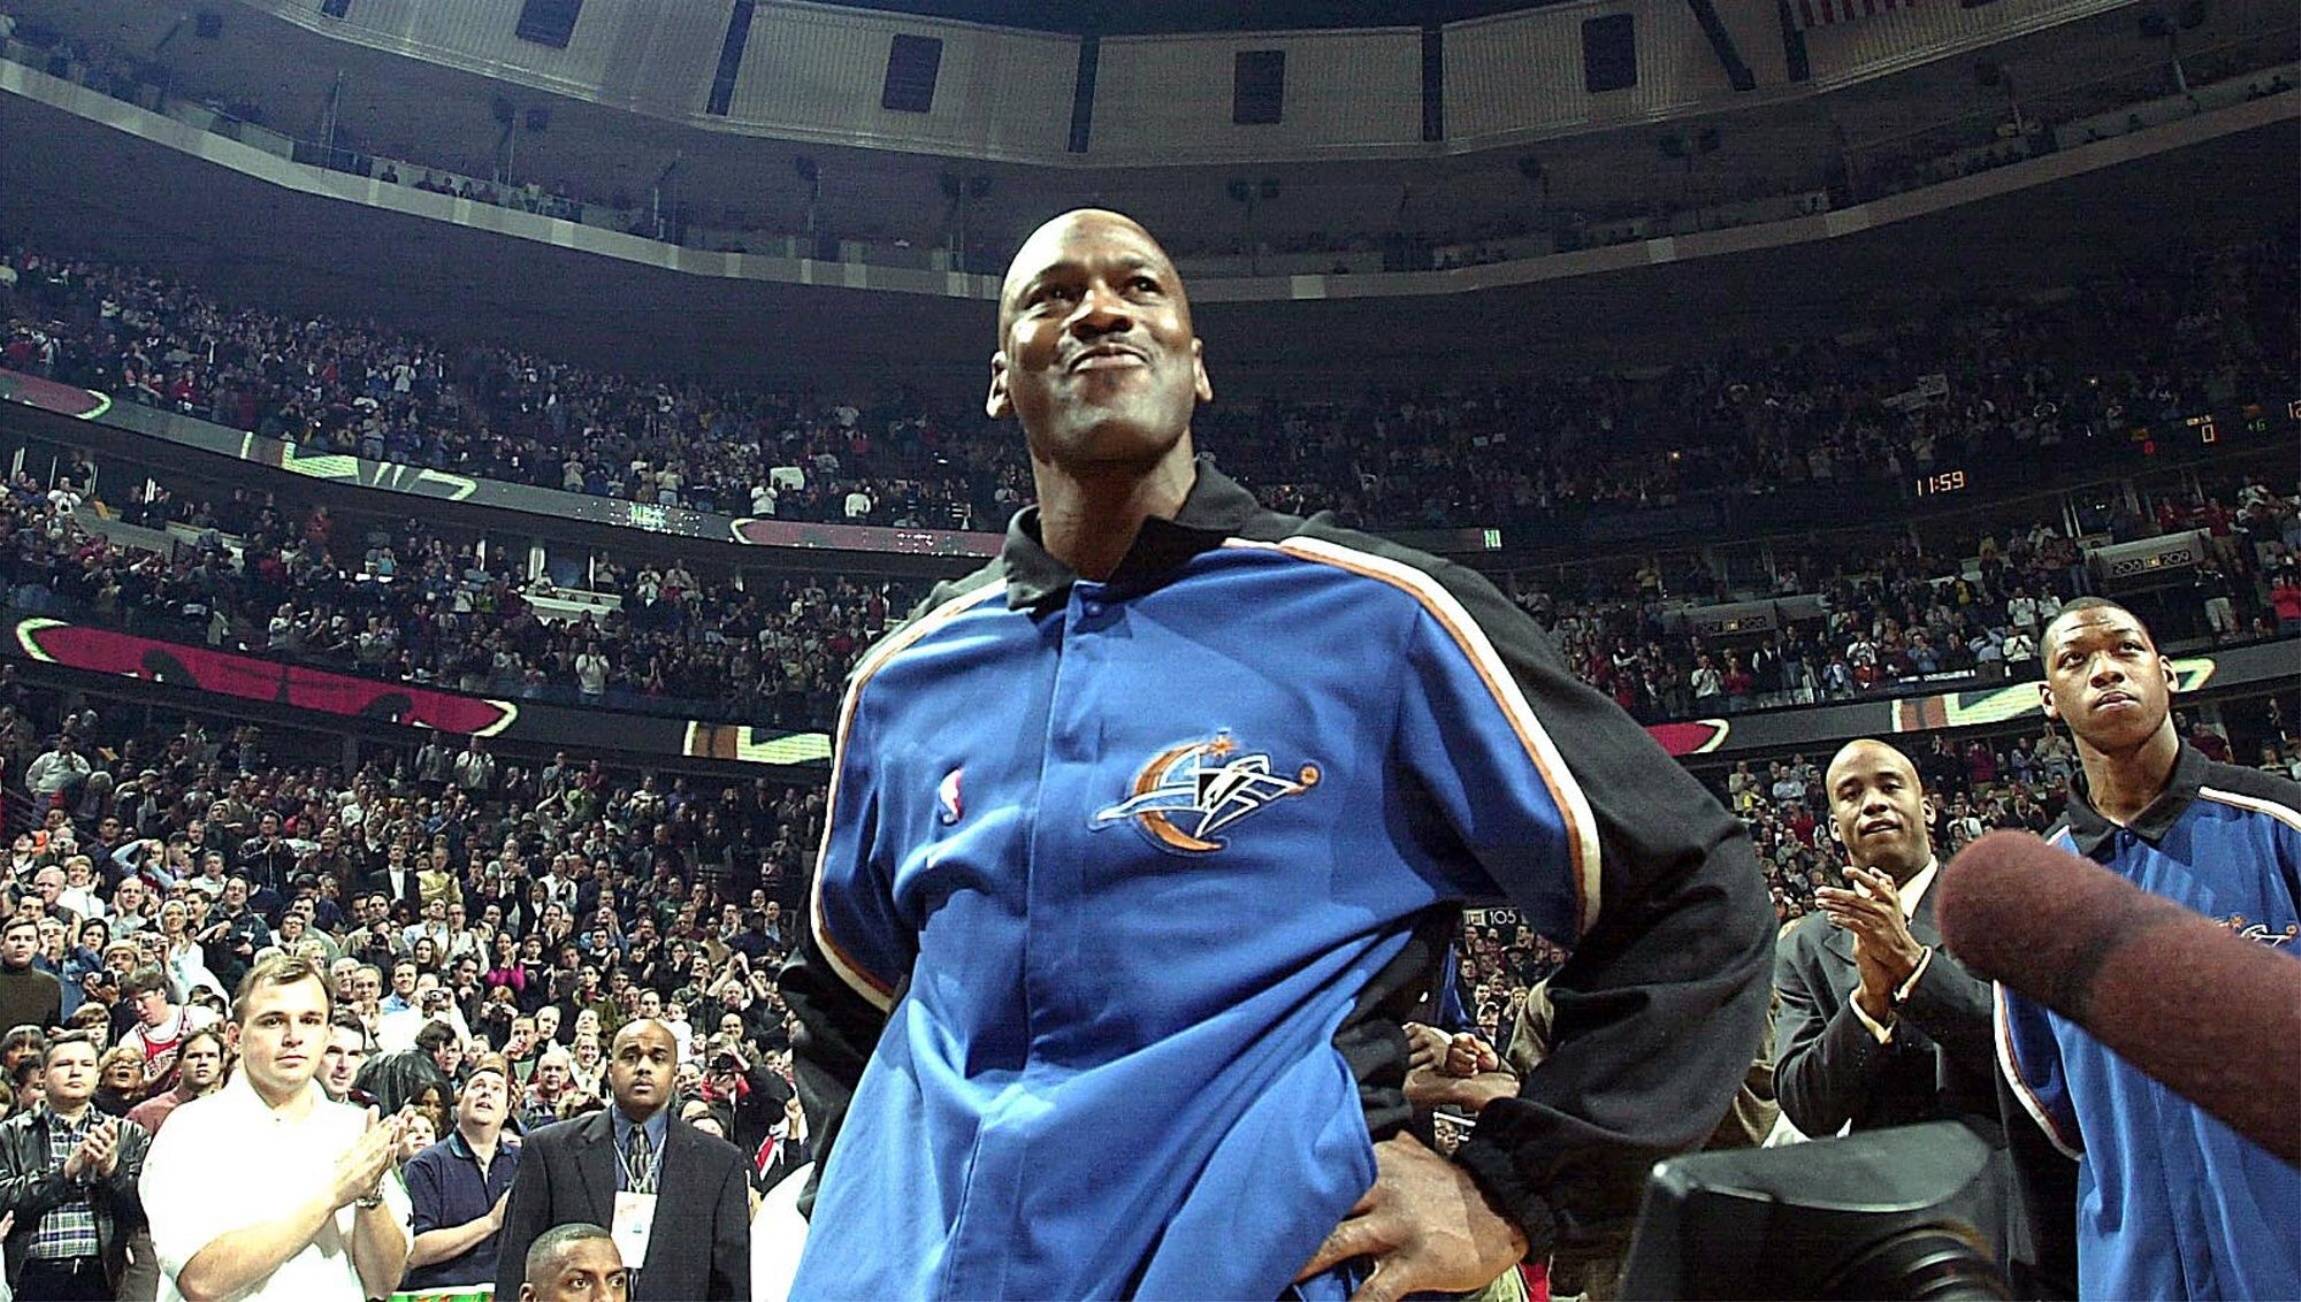 Afstemning arbejde stun Michael Jordan retirement: How many times did MJ retire in his career?